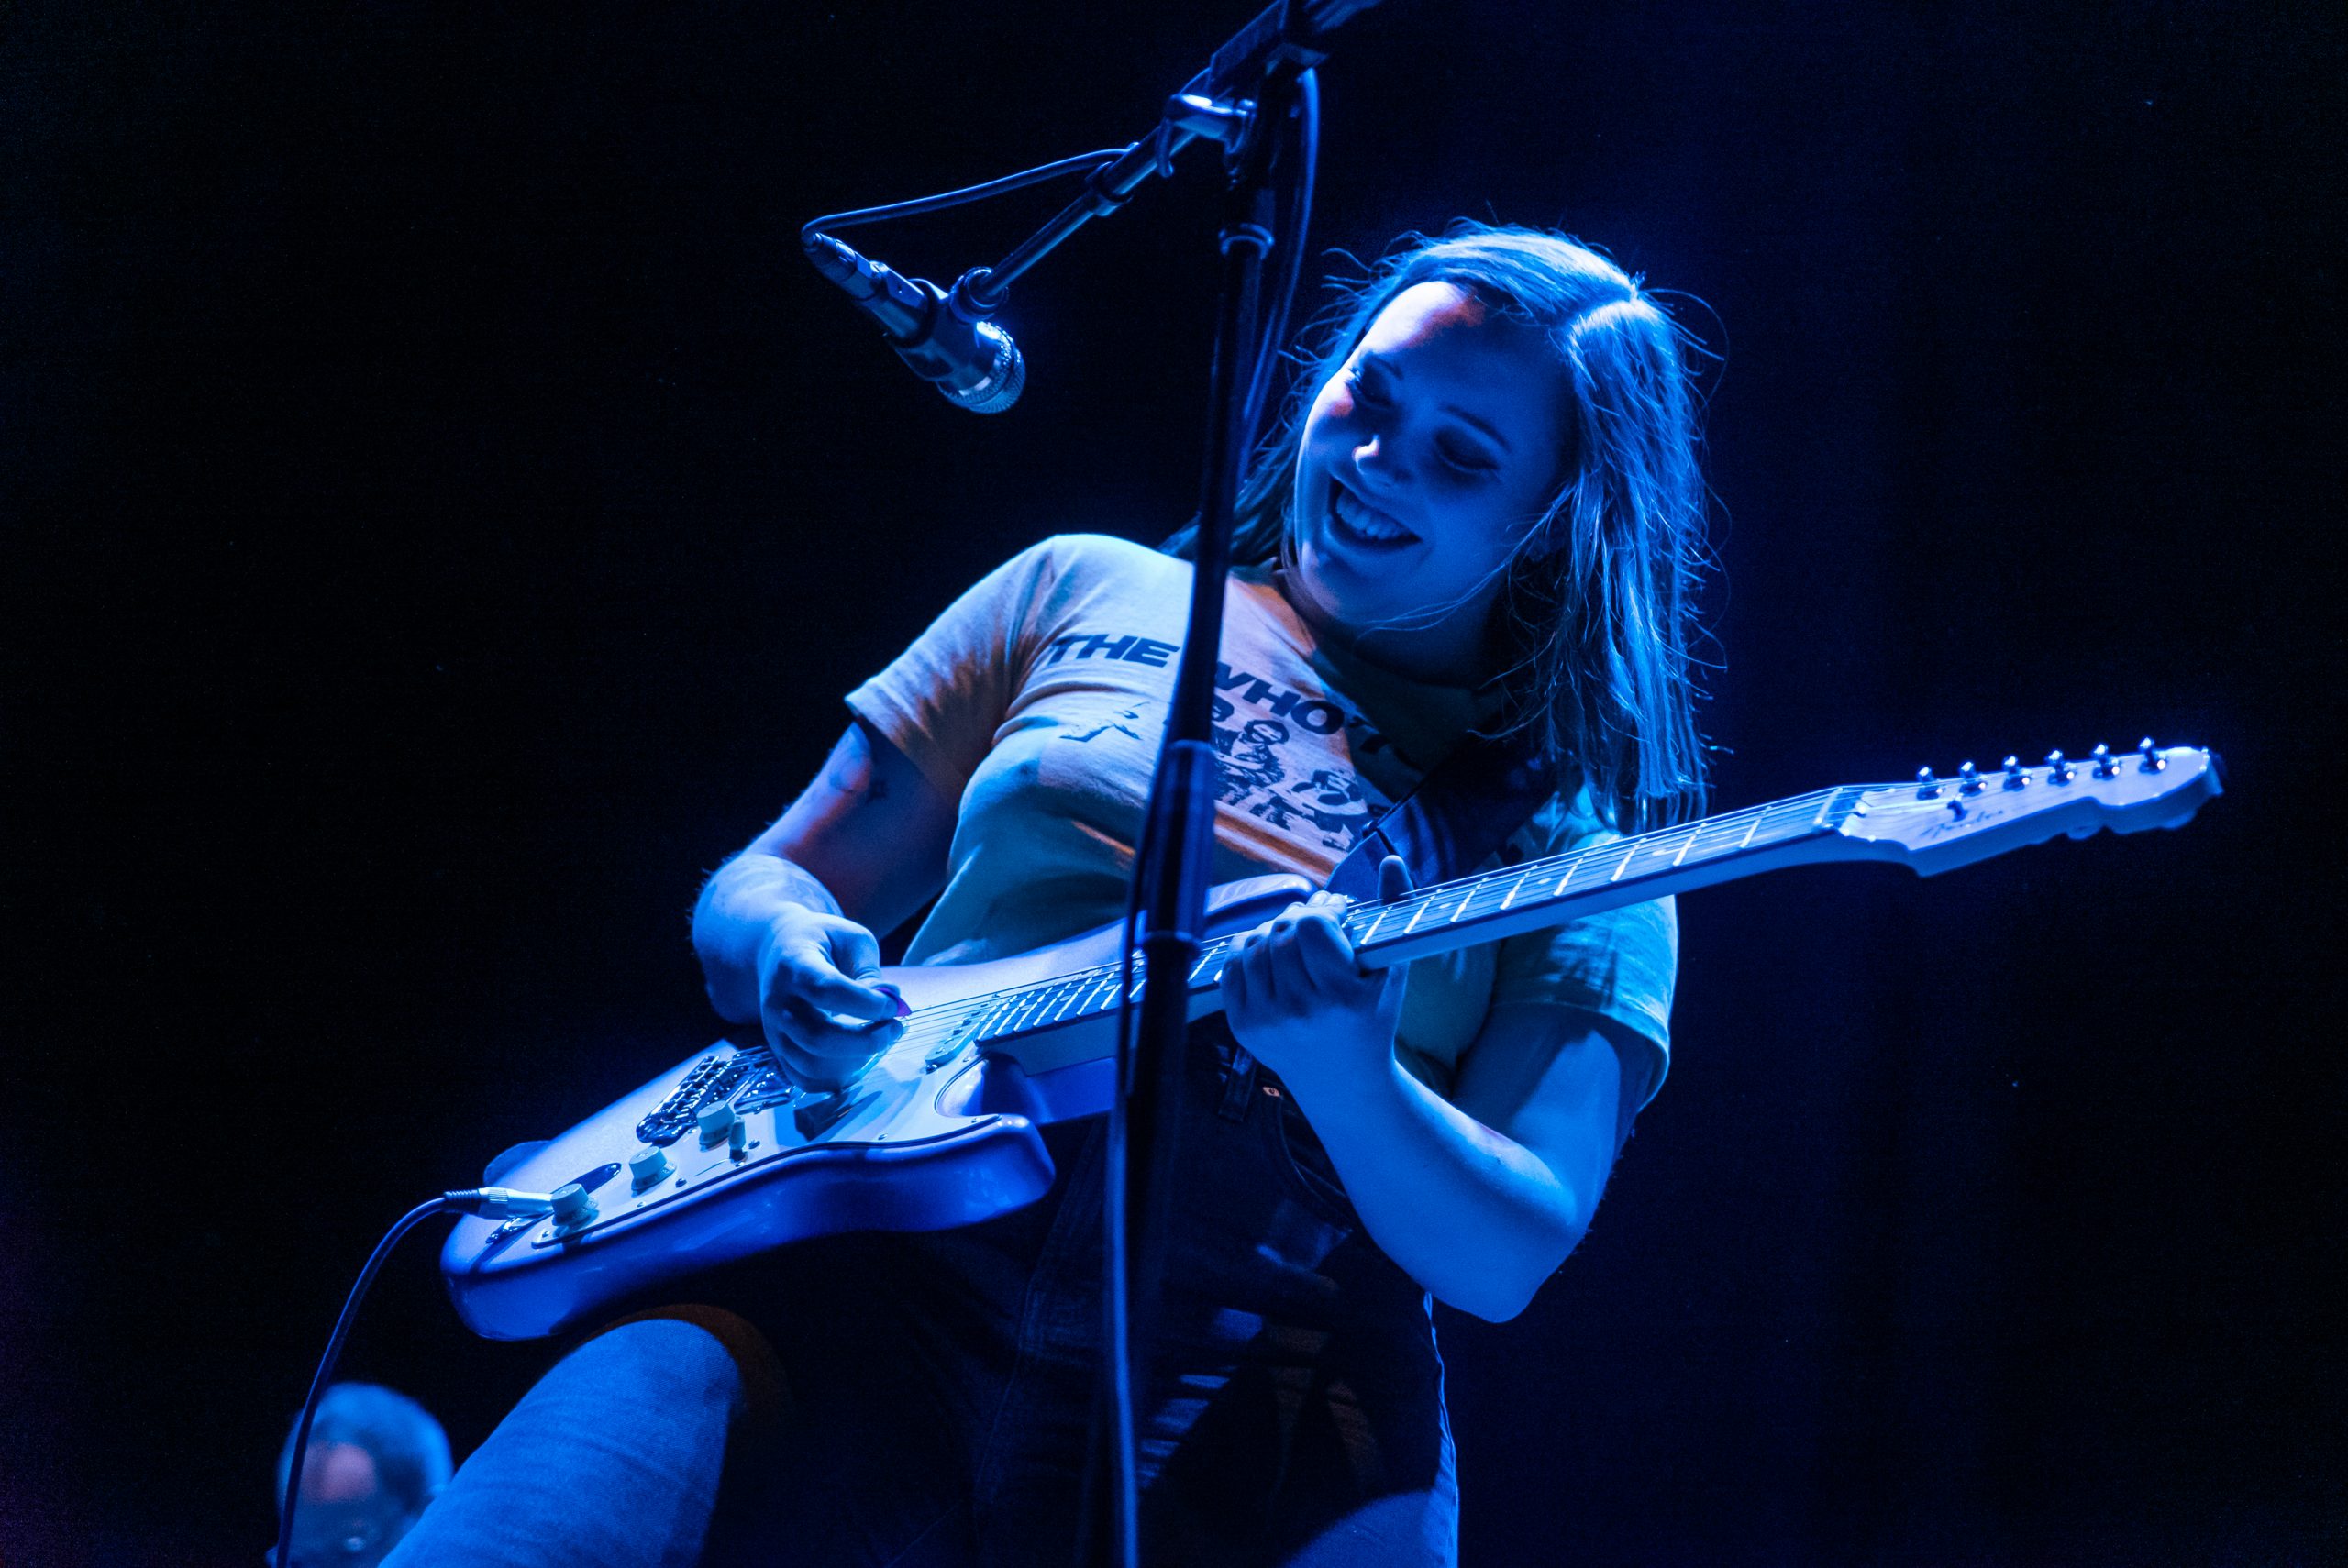 The band Soccer Mommy performs at Cornell University